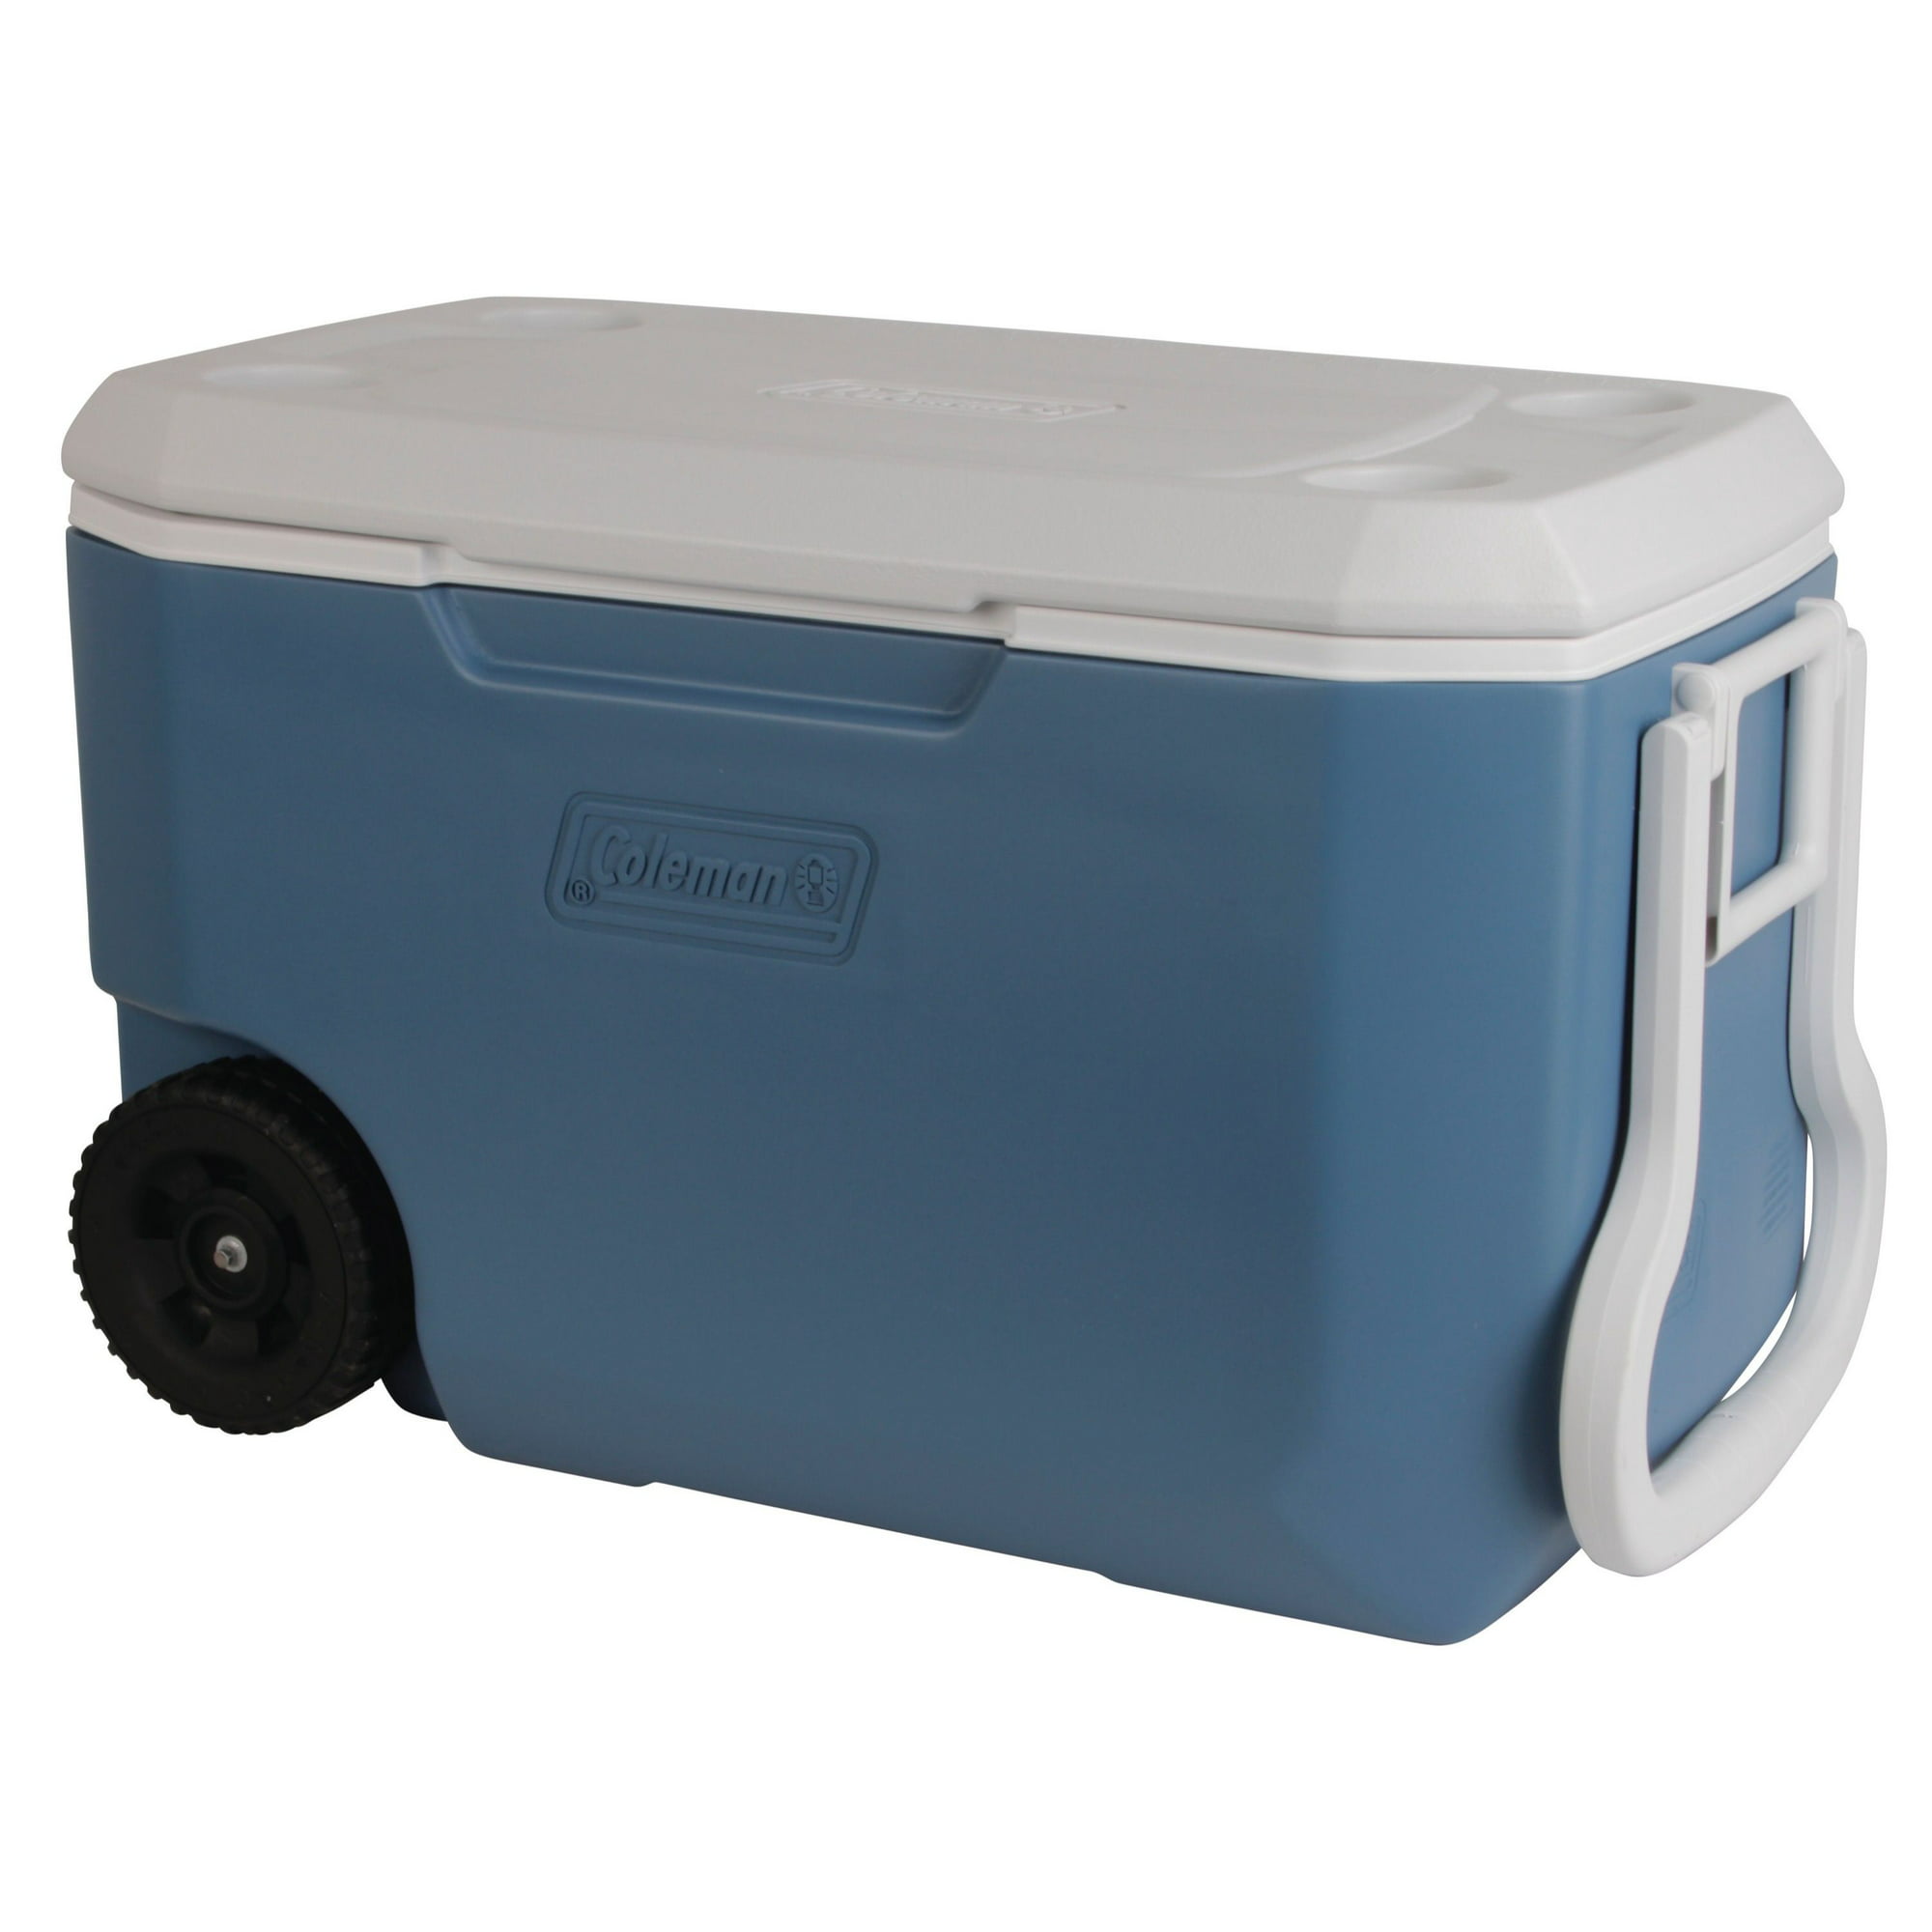 COLEMAN CHEST COOLER 66.2L for 5 days